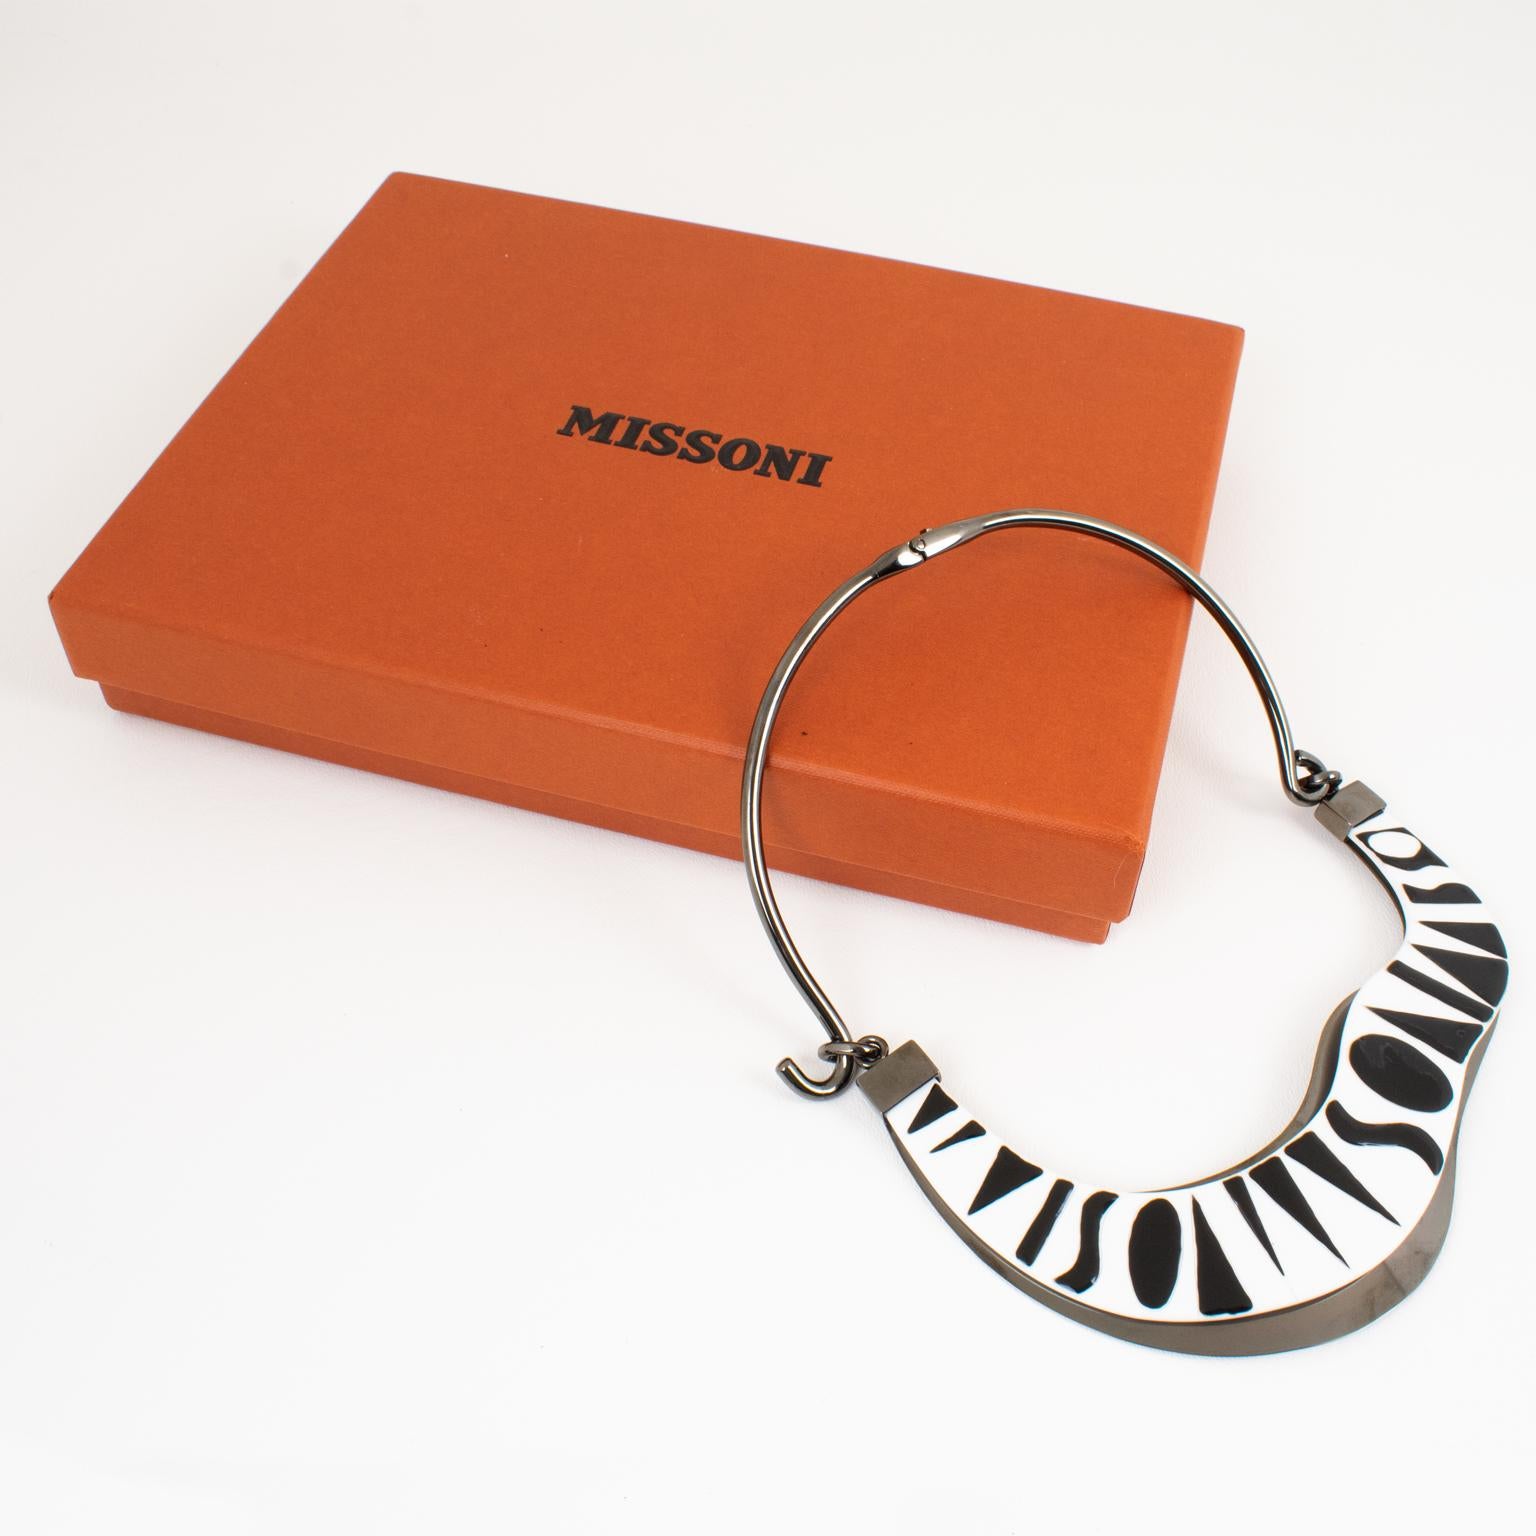 Missoni Black and White Lucite and Metal Choker Necklace, Runway Spring 2014 In Excellent Condition For Sale In Atlanta, GA